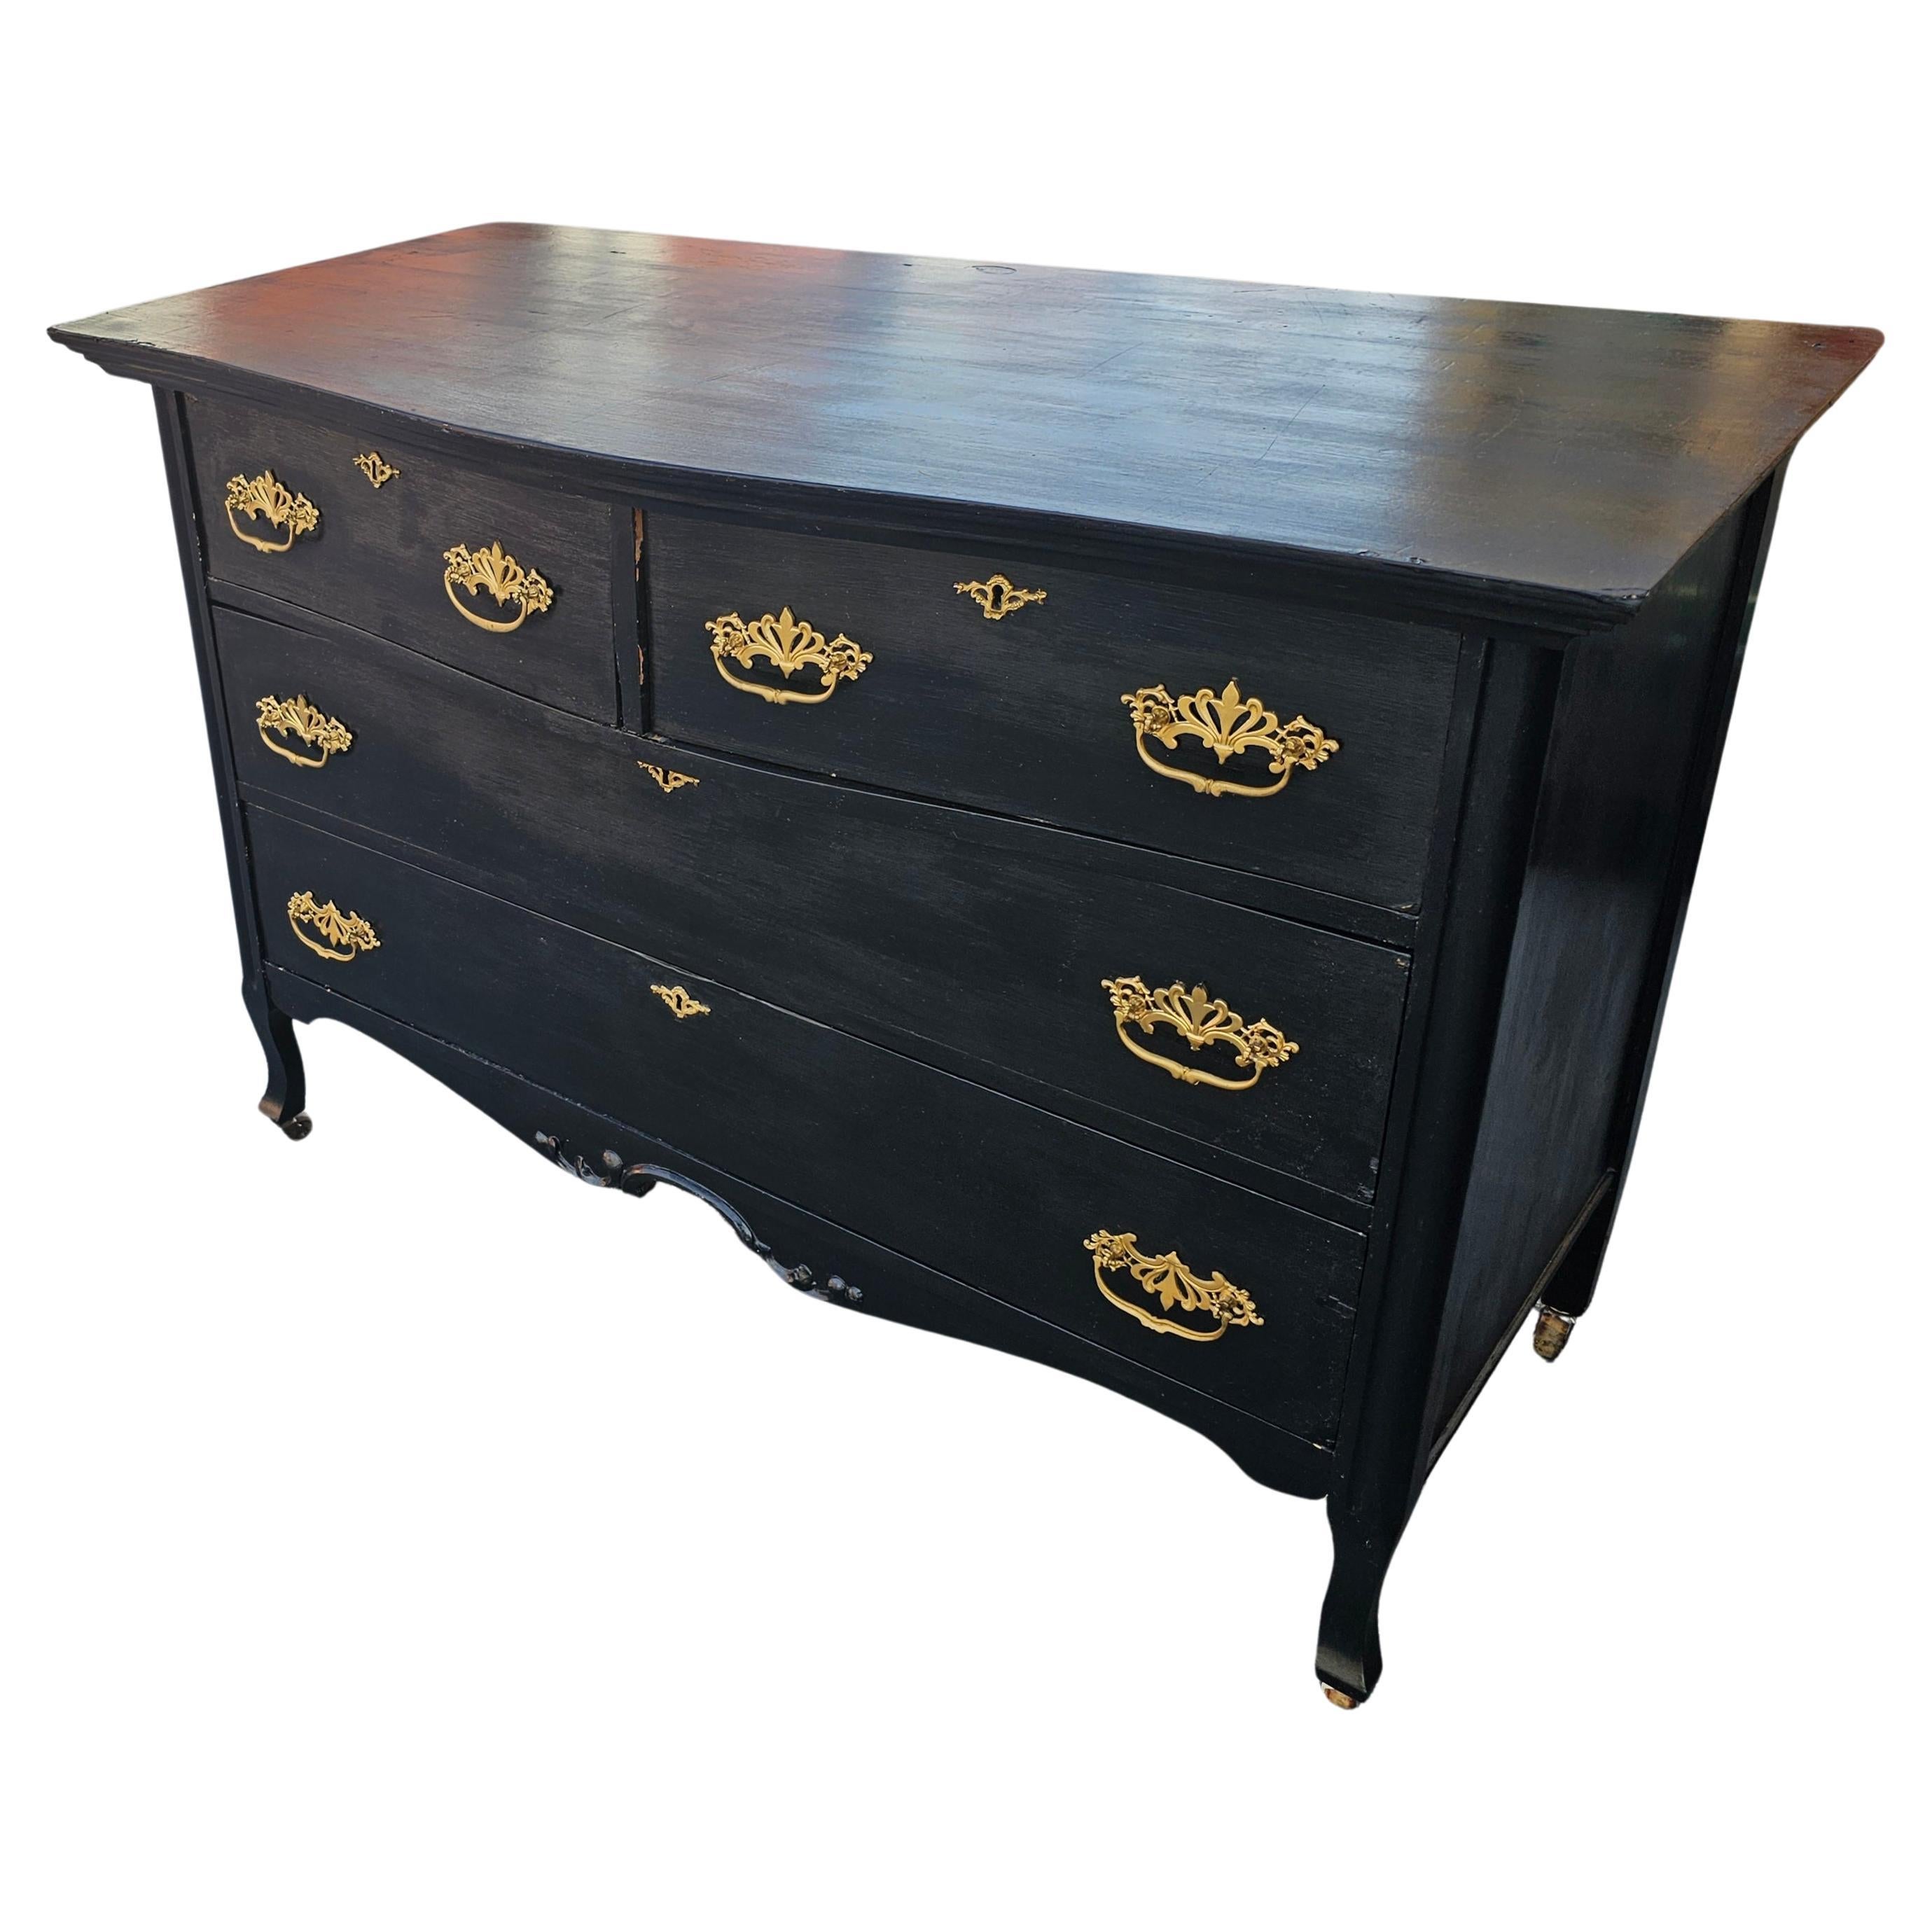 A 19th Century Painted Solid Pine 4-Drawer Dresser on Wheels. Black painted outside and white painted inside. All solid pine inside out. Dovetail drawers. Newer handles. Matching Mirror available in our inventory in a separate listing